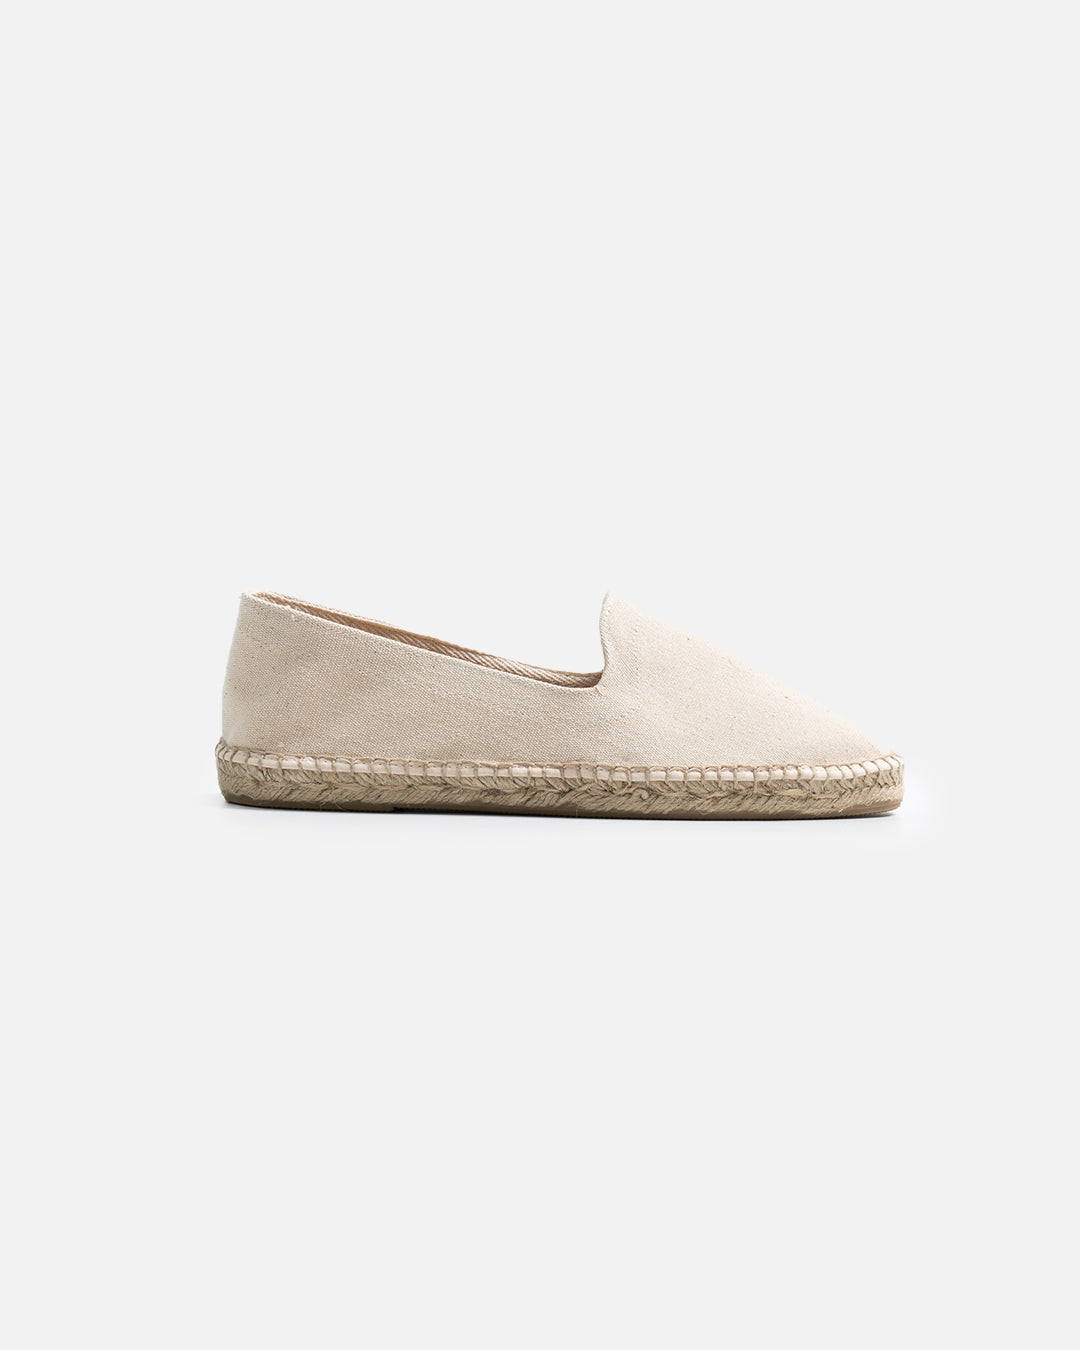 The Resort Co Espadrilles Ivory Canvas